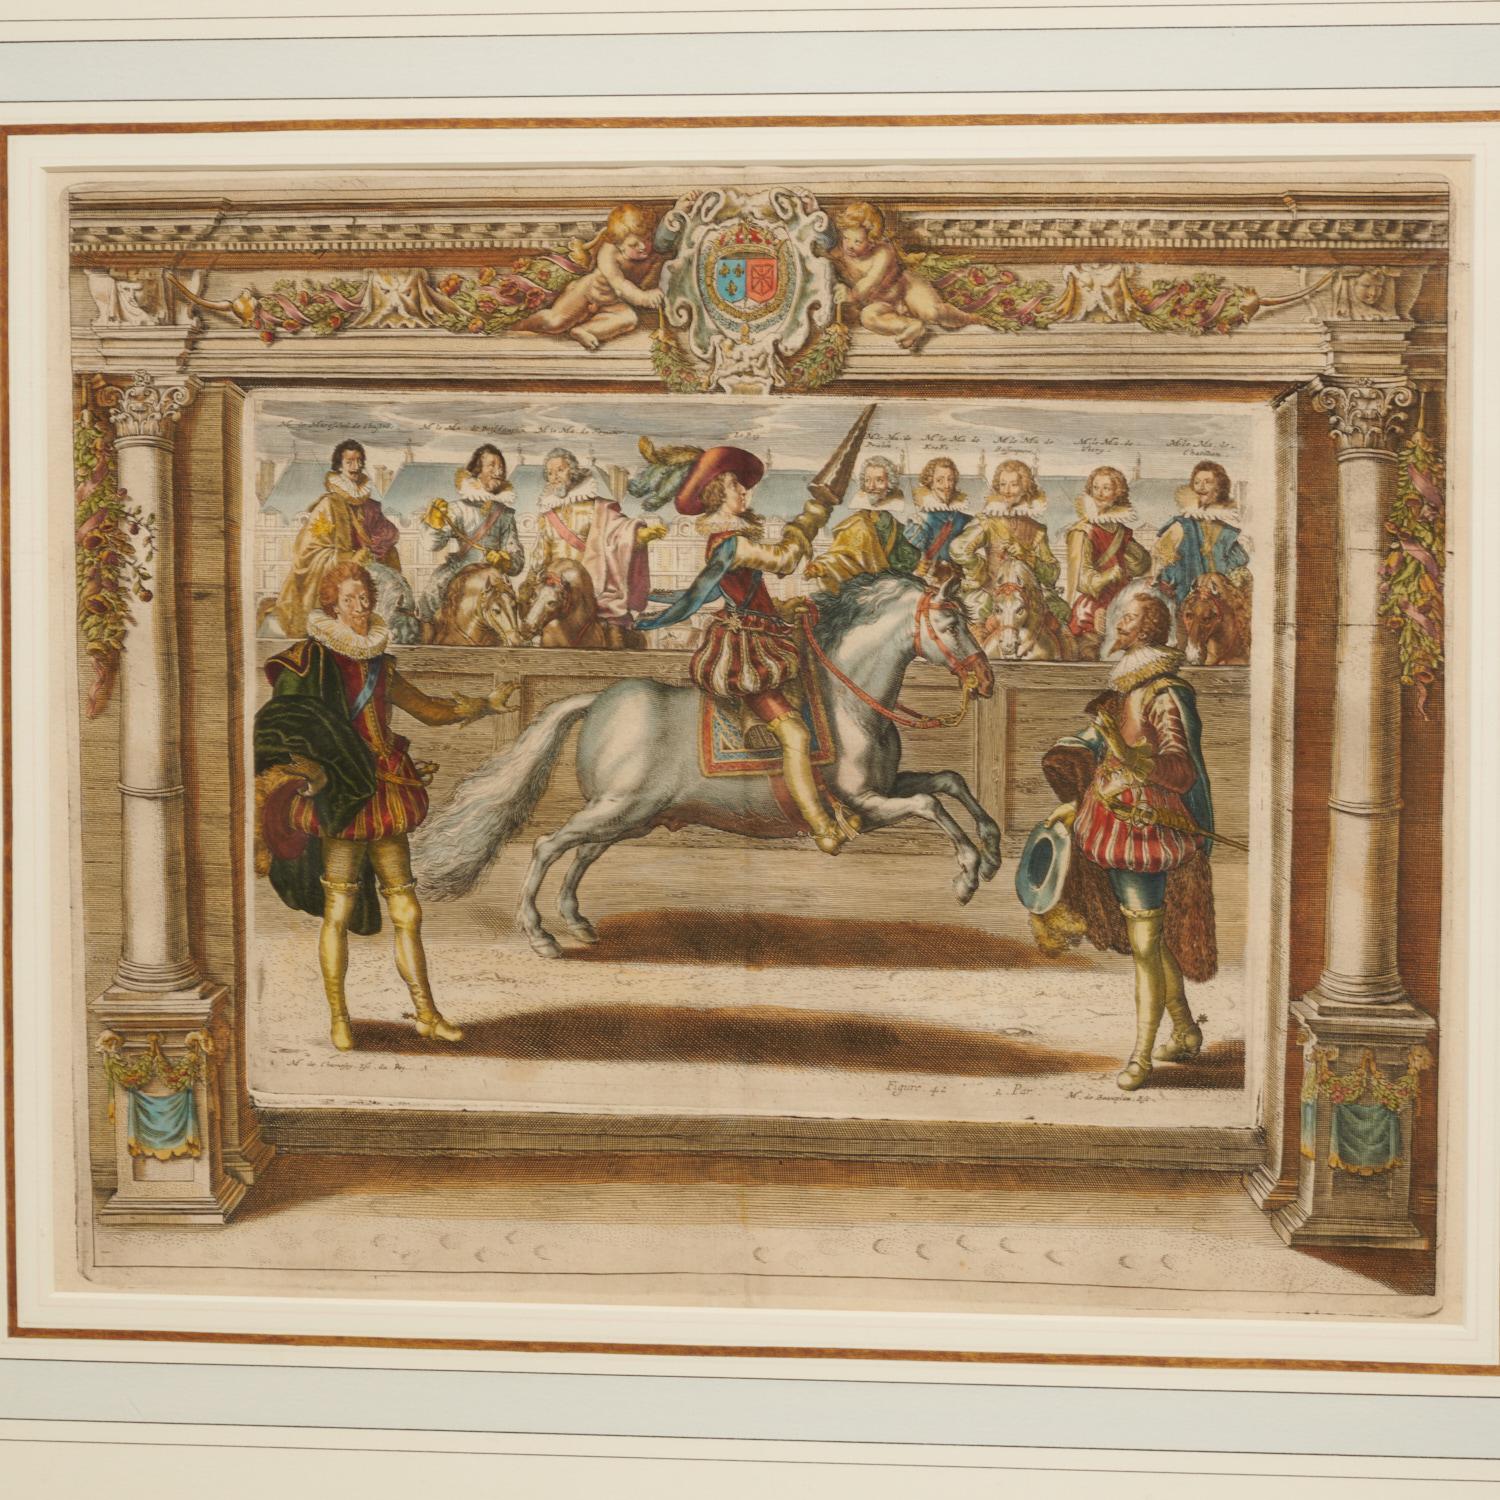 Early 17th century, French hand colored equestrian engraving. After Antoine de Pluvinel (French, 1552-1620), 